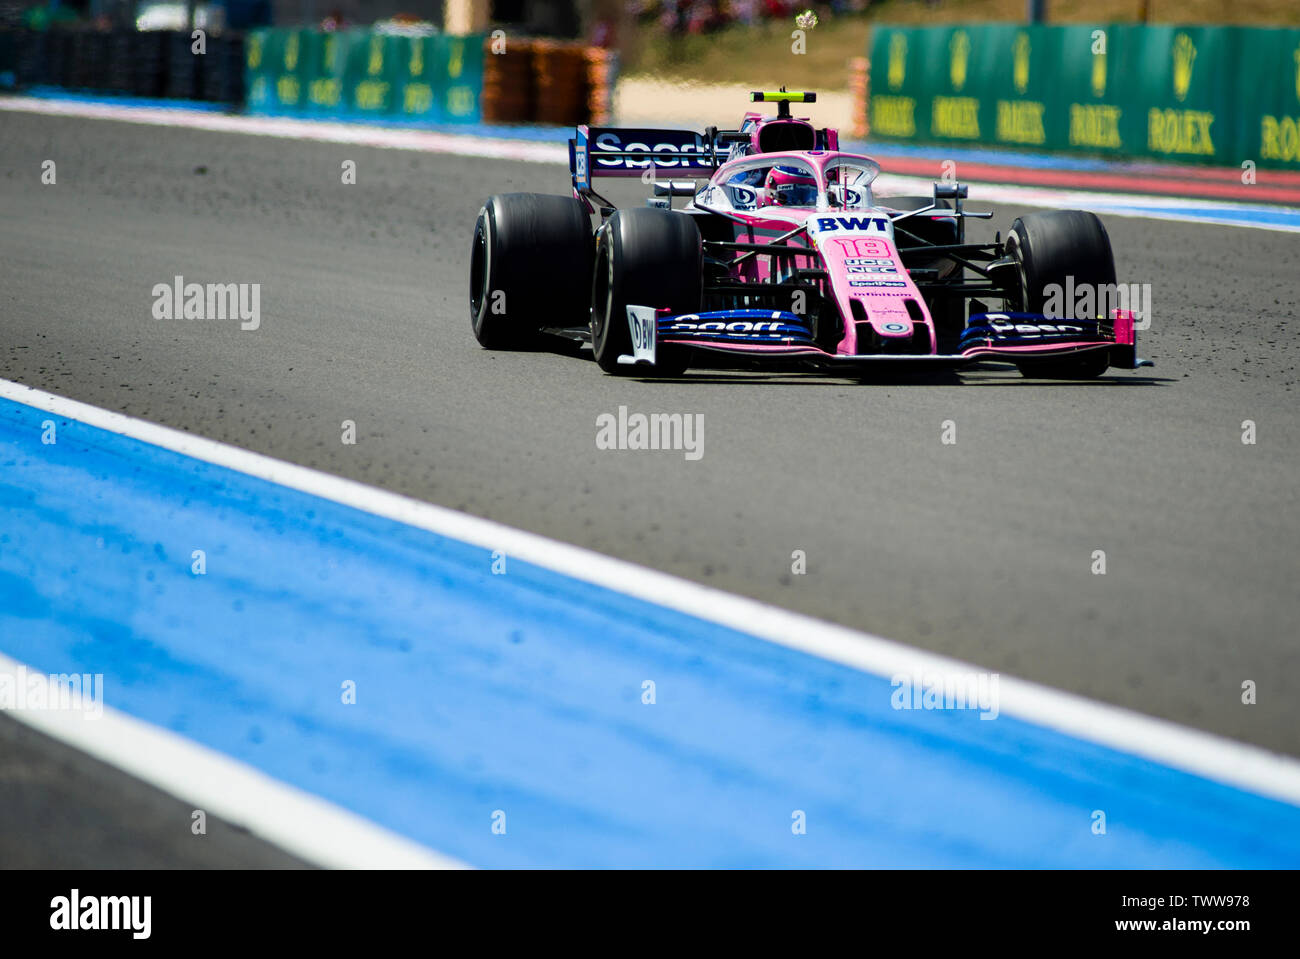 Marseille, France. 23rd June, 2019. FIA Formula 1 Grand Prix of France, Race Day; Lance Stroll of the Racing Team in action during the French Grand Prix Credit: Action Plus Sports